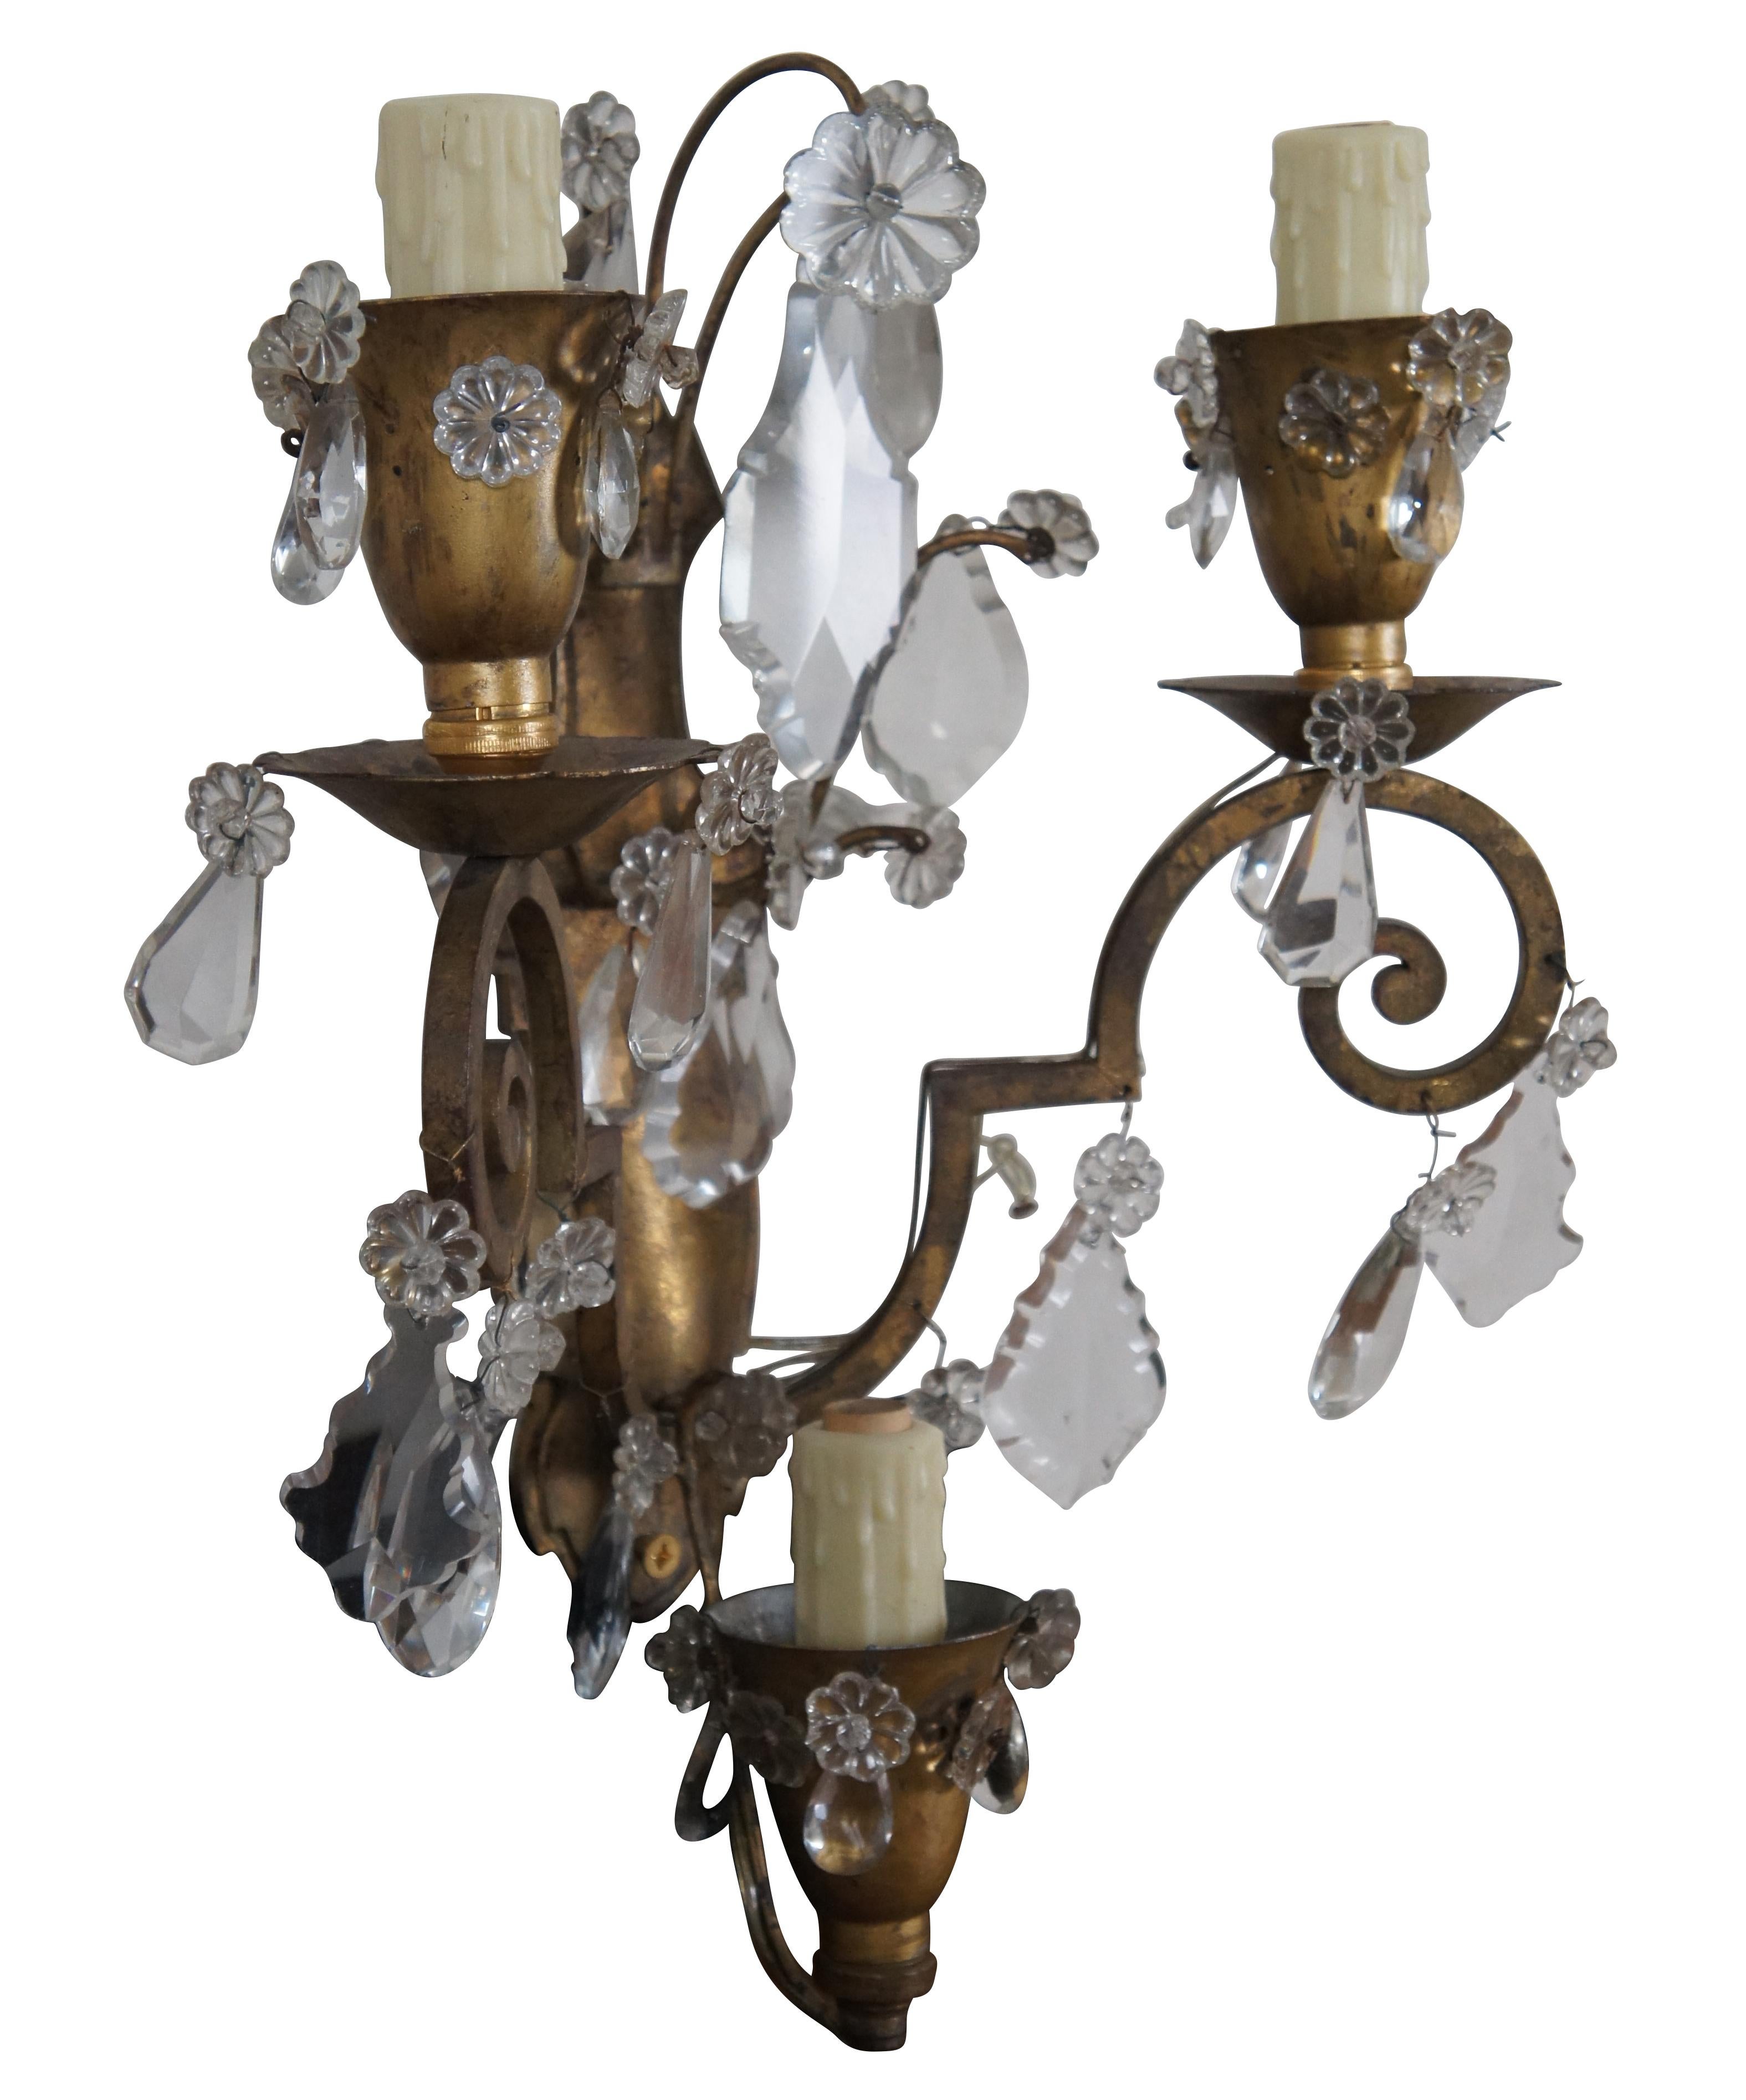 2 Hollywood Regency Scrolled Brass & Cut Crystal 3 Light Candelabra Wall Sconces In Good Condition For Sale In Dayton, OH